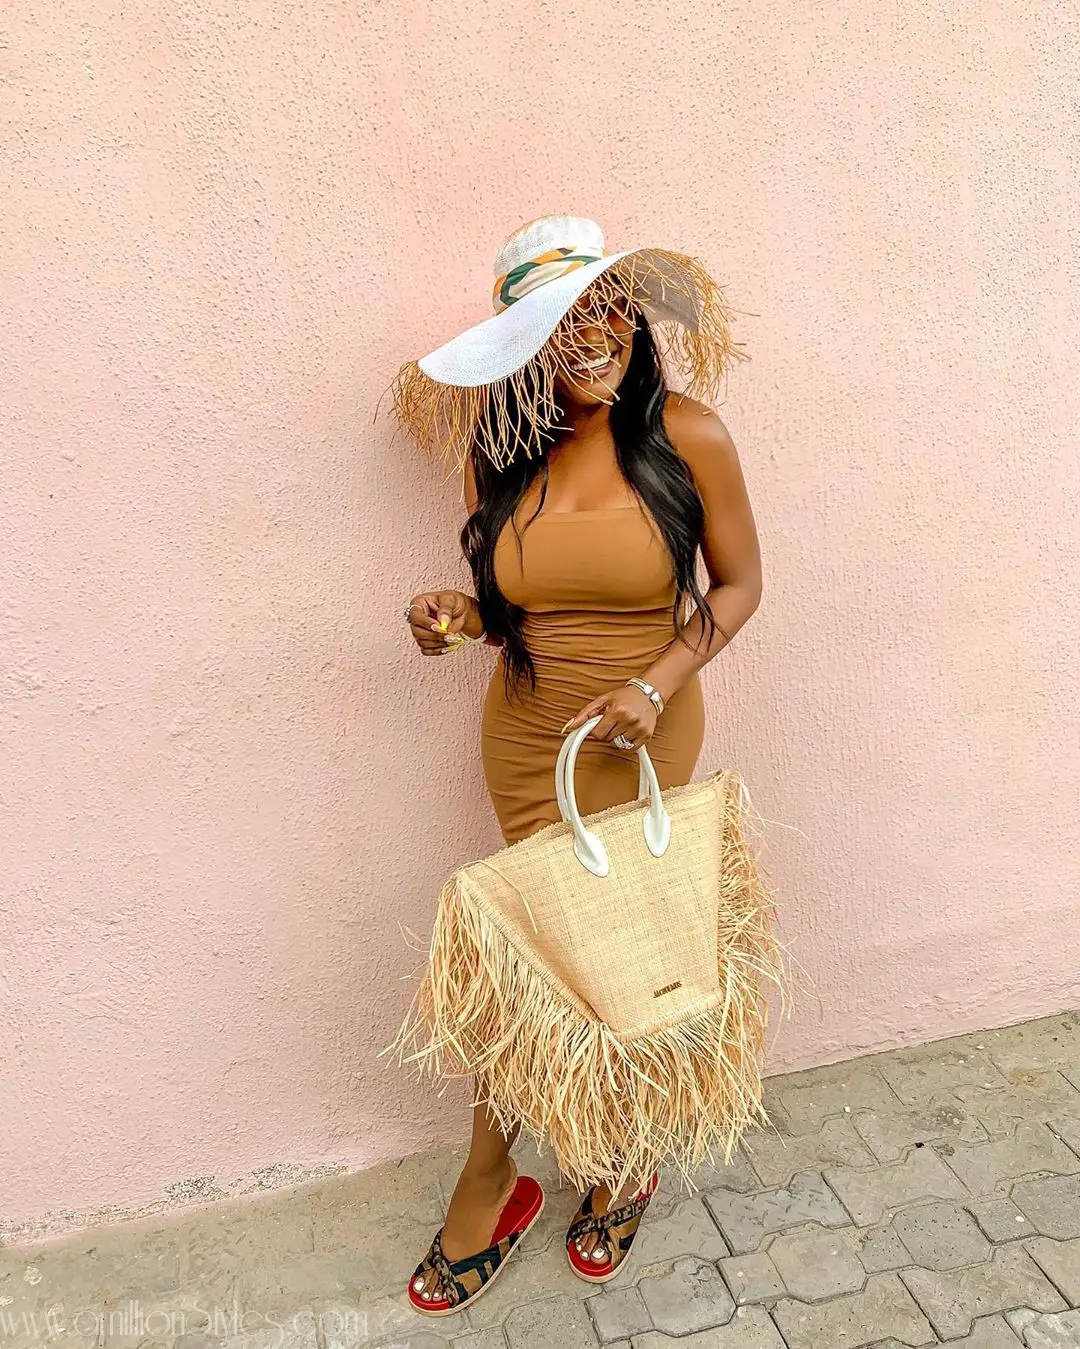 This Jacquemus Fringe Tote Is Reigning, Who Rocked It Best?